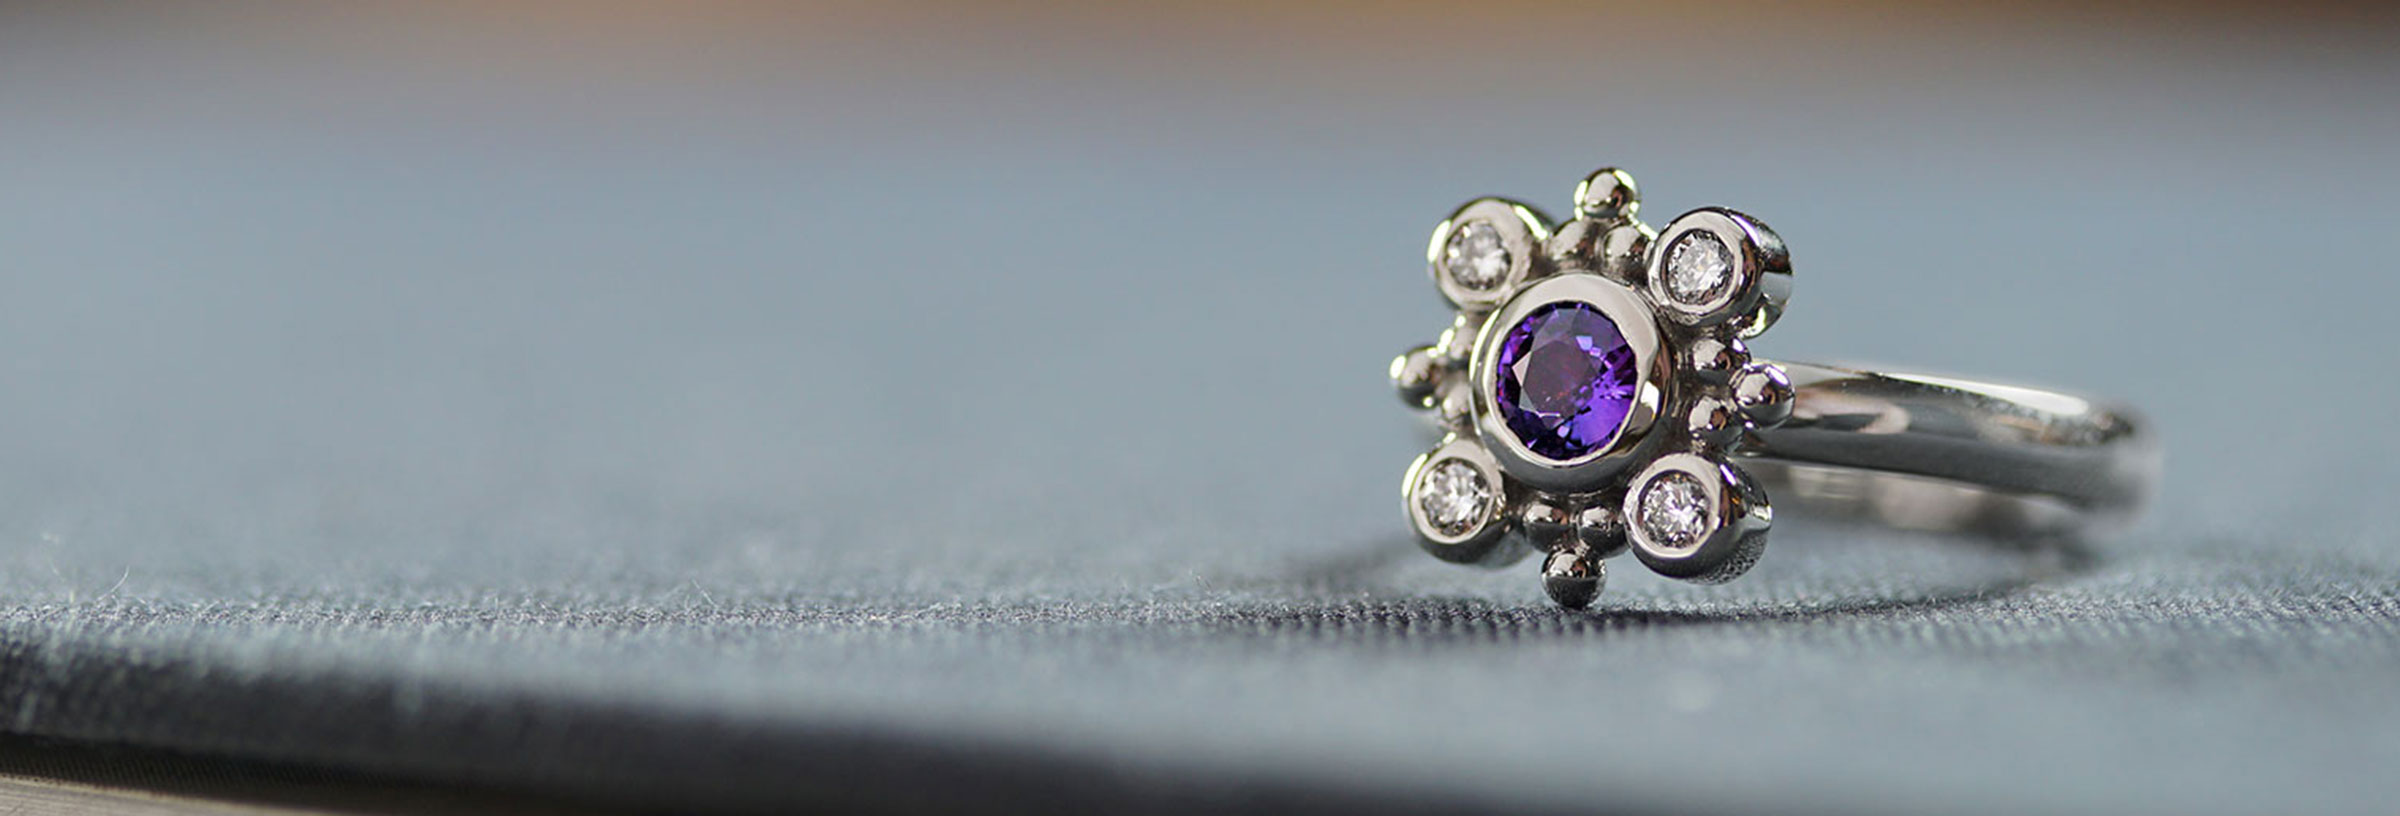 medieval-inspired-purple-sapphire-and-diamond-engagement